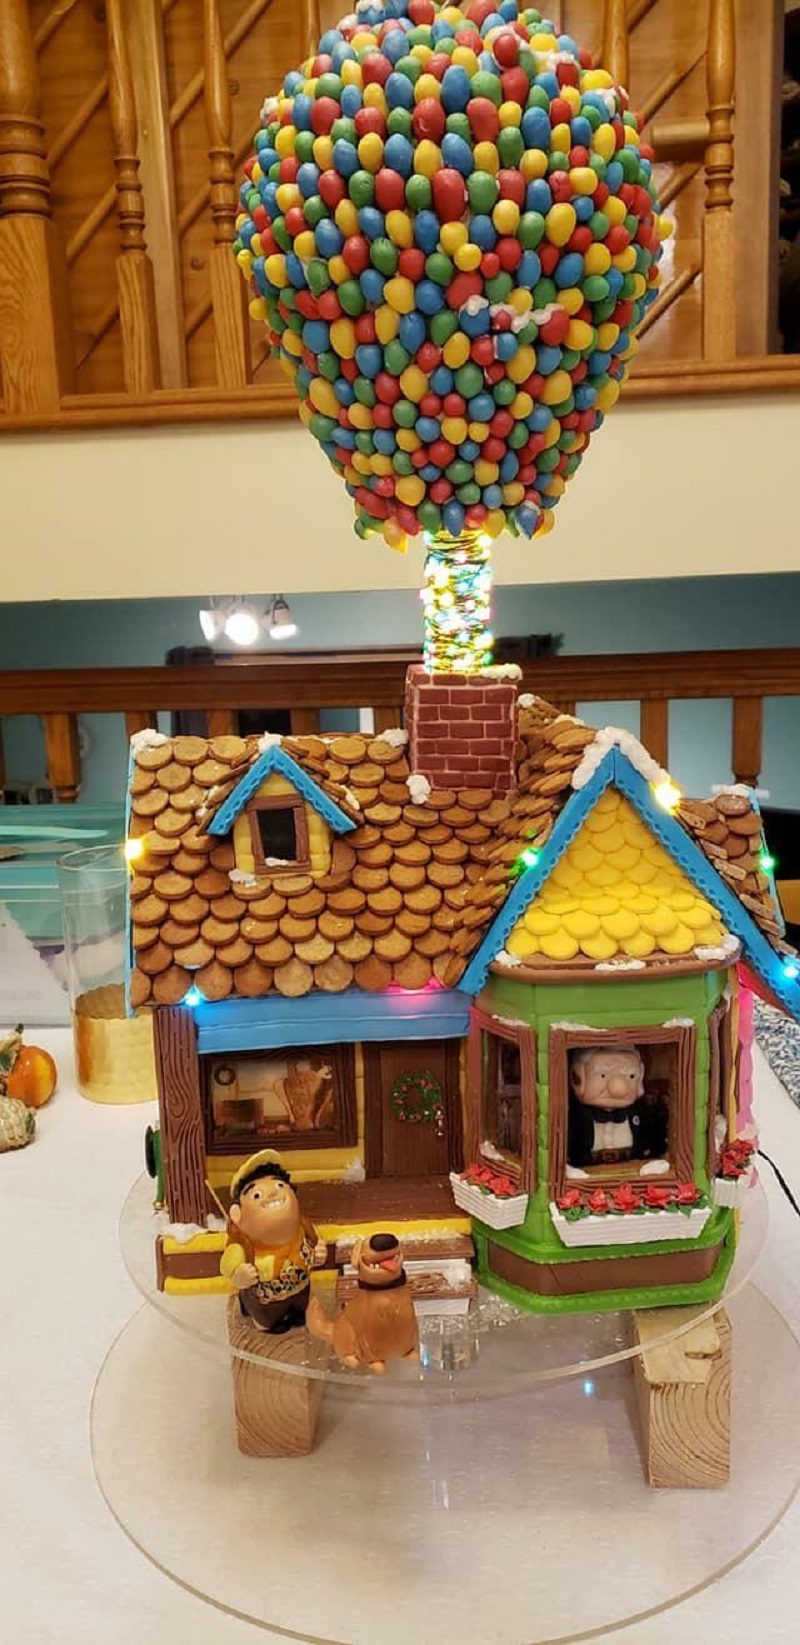 My Mom And I Made A 100% Edible (Except The Lights) 'Up' Themed Gingerbread House